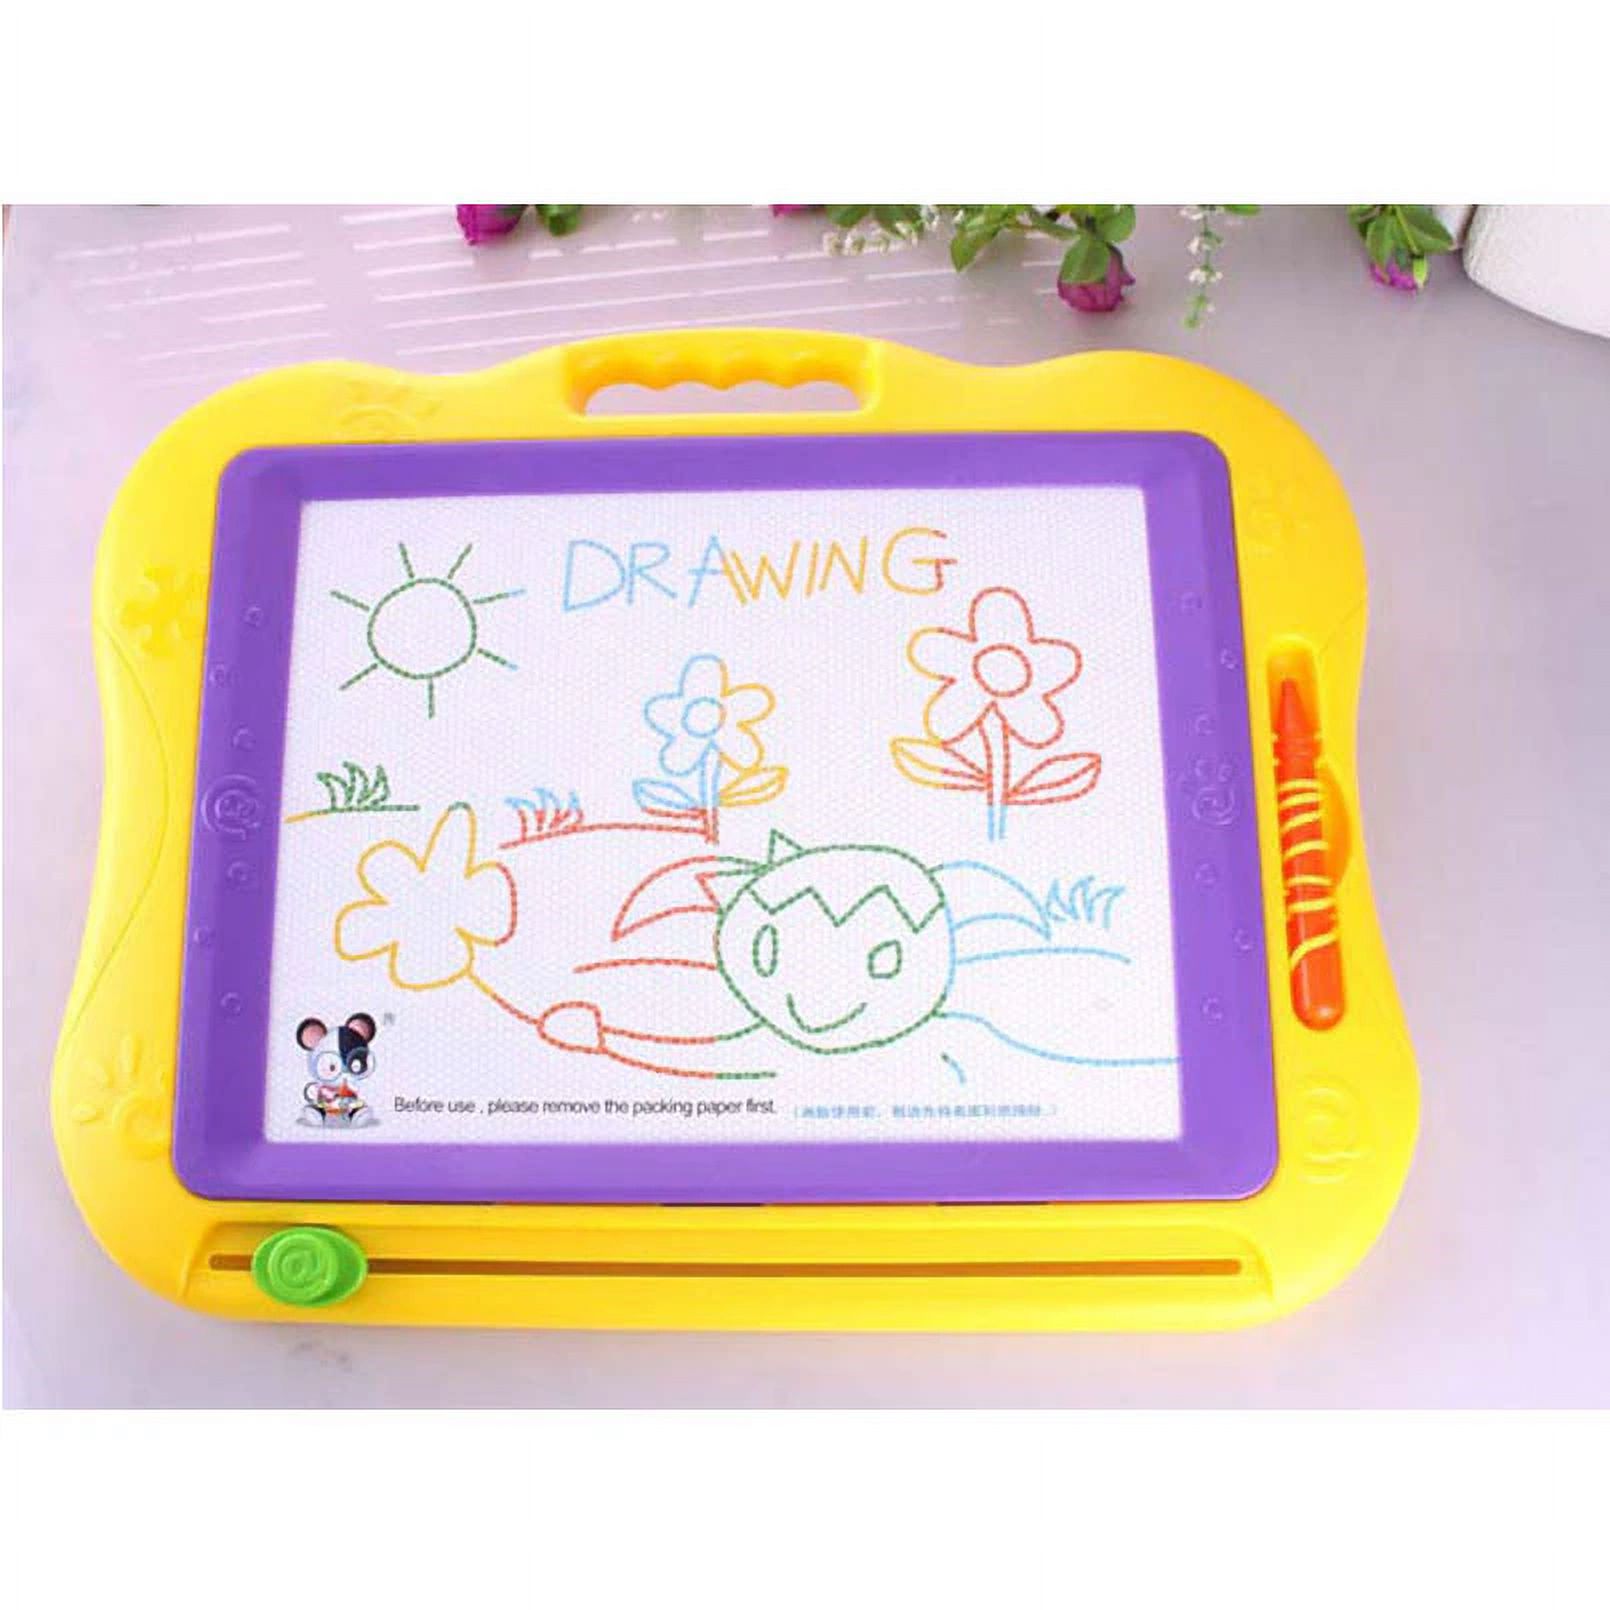 44*38cm Big Size Magnetic Drawing Graffiti Board Toys Kids Sketch Pad  Doodle Cartoon Painting With Pen Toy Learning Reusable Toy 